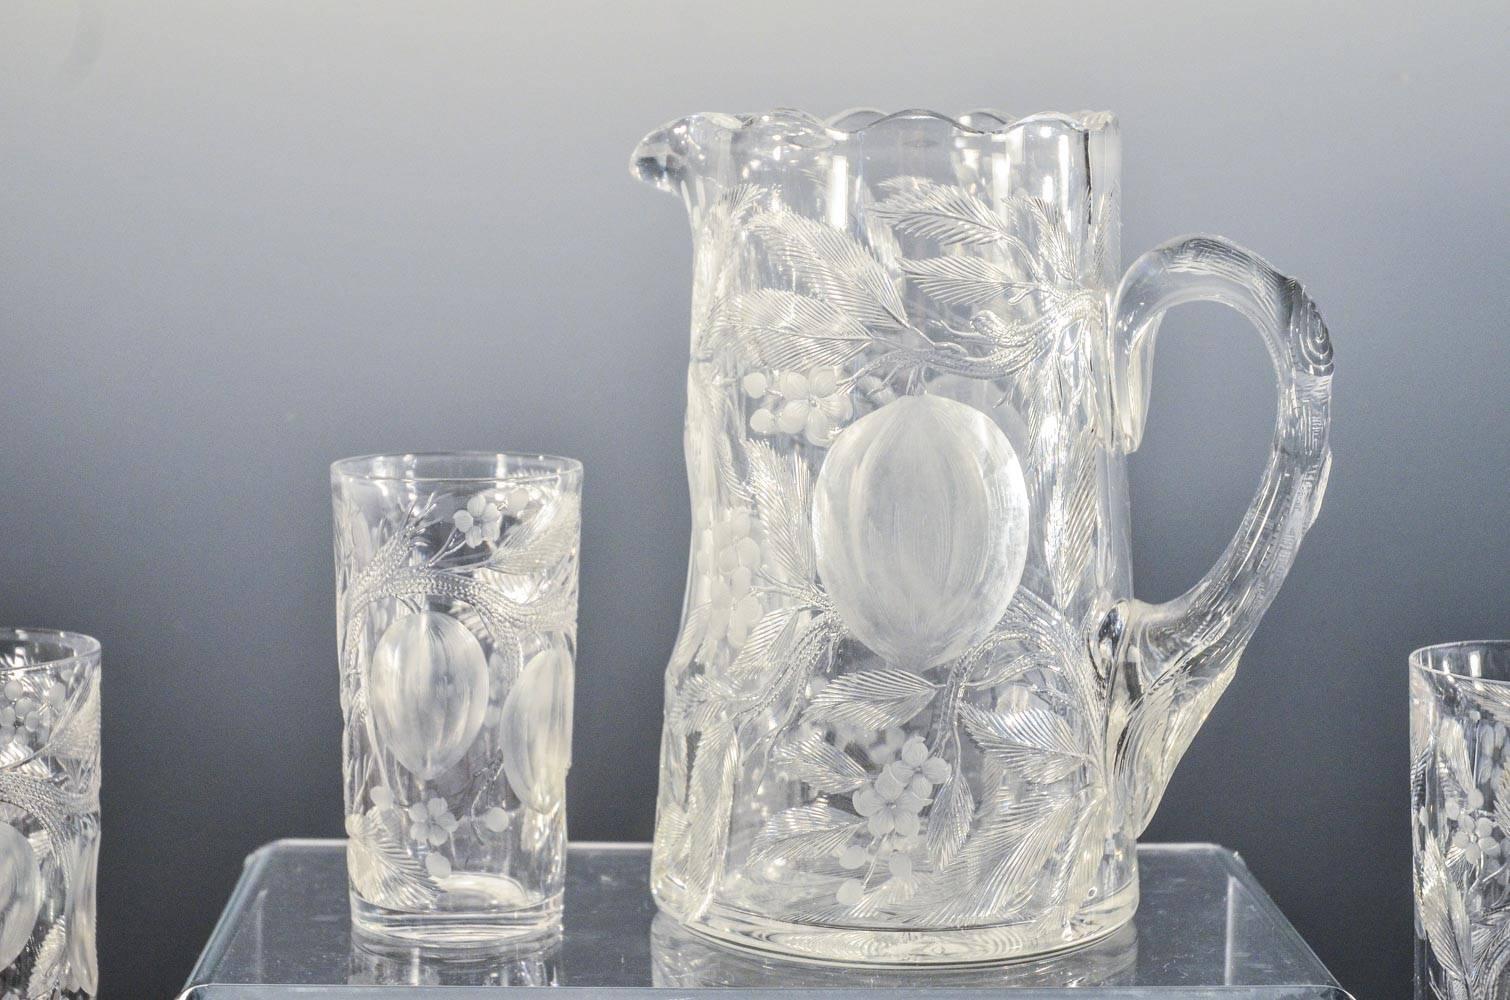 This is a rare set comprised of a fabulous signed Hawkes pitcher in the “Fruit Pattern” and 8 matching tumblers, measuring  4.75